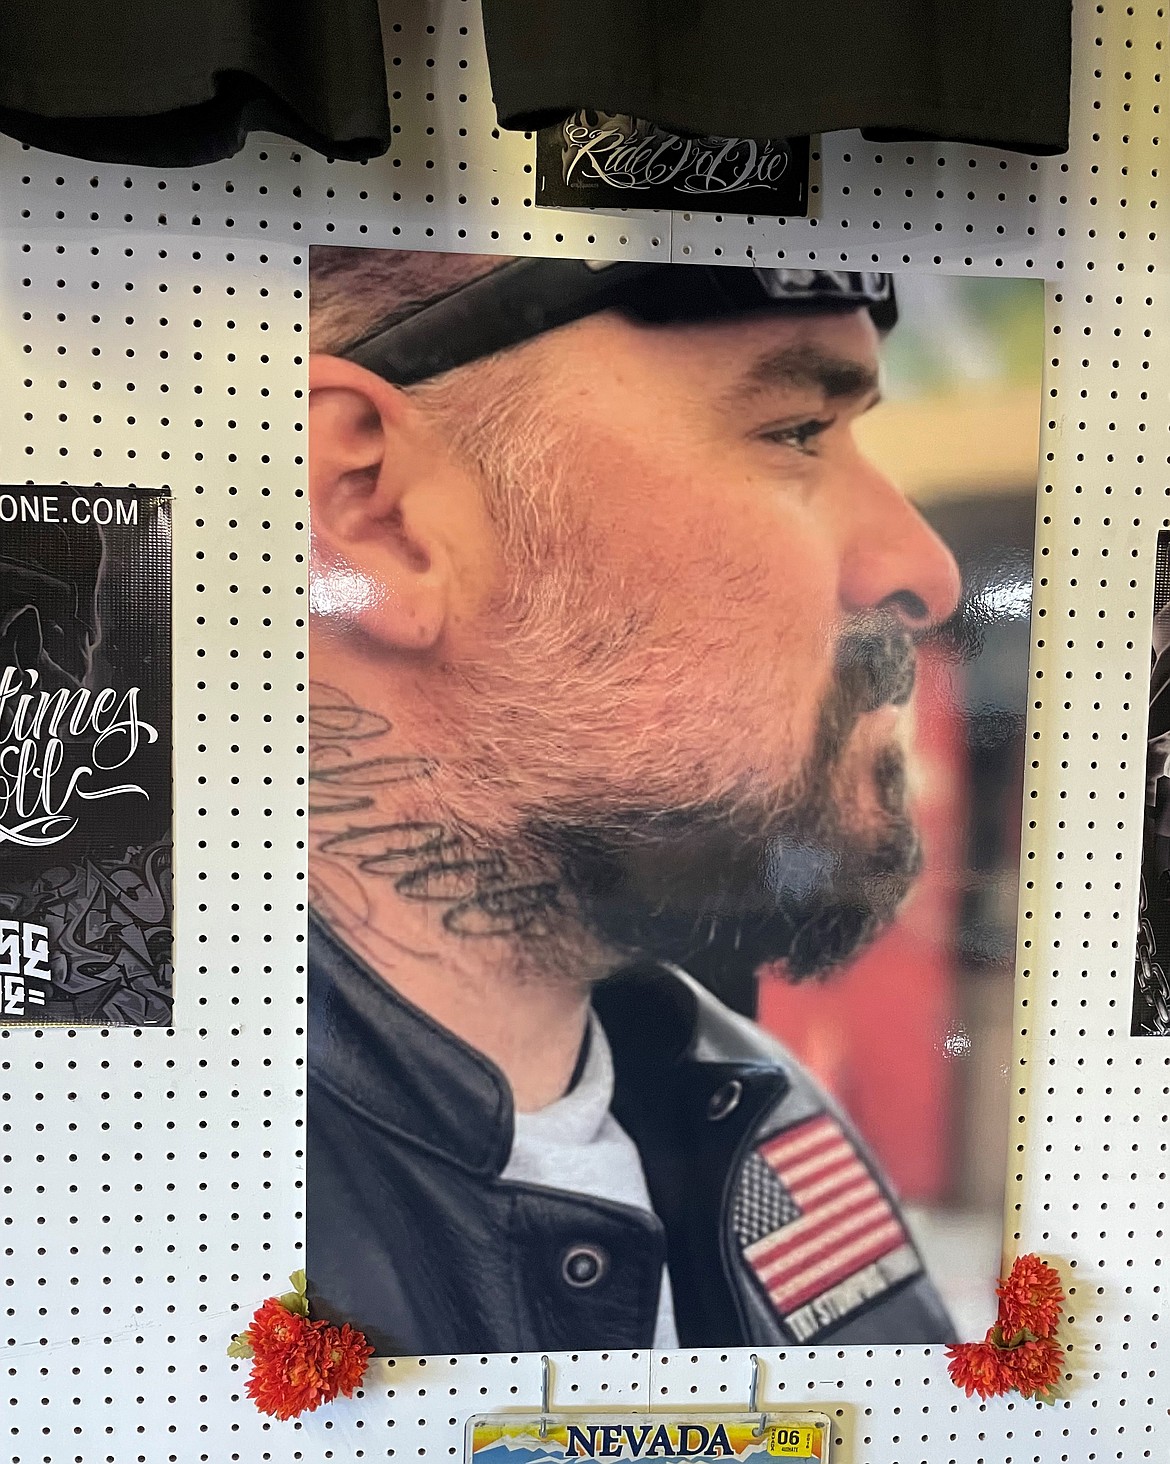 A photo of Eric “E DUBB” Kreuger, the namesake of EDUBS C/S, a custom auto detailing shop and clothing company owned by his brother Paul Carney. “C/S” means “con safos” — with safety — in Spanish, and is a saying used by Mexican Americans.